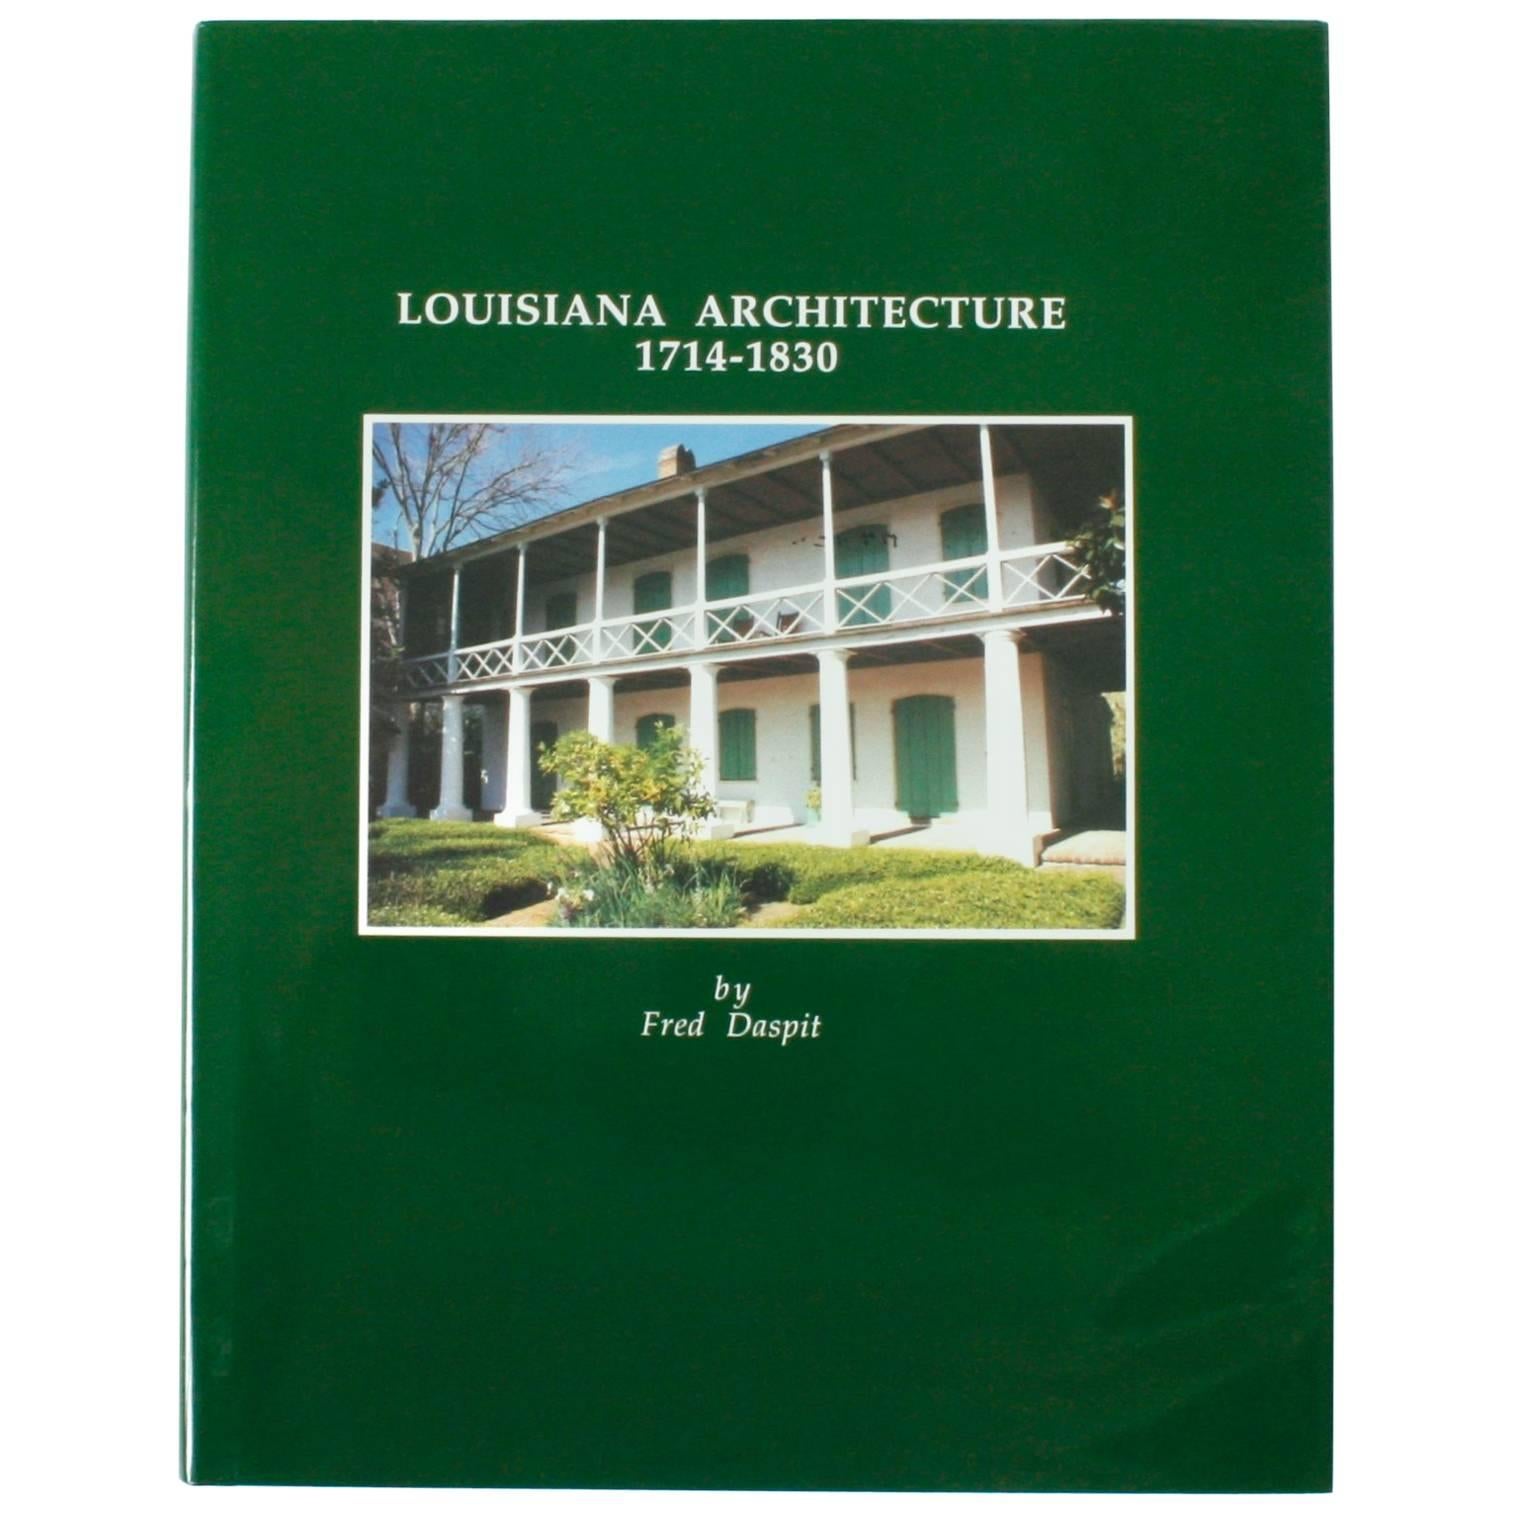 Louisiana Architecture 1714-1830 by Fred Daspit, First Edition